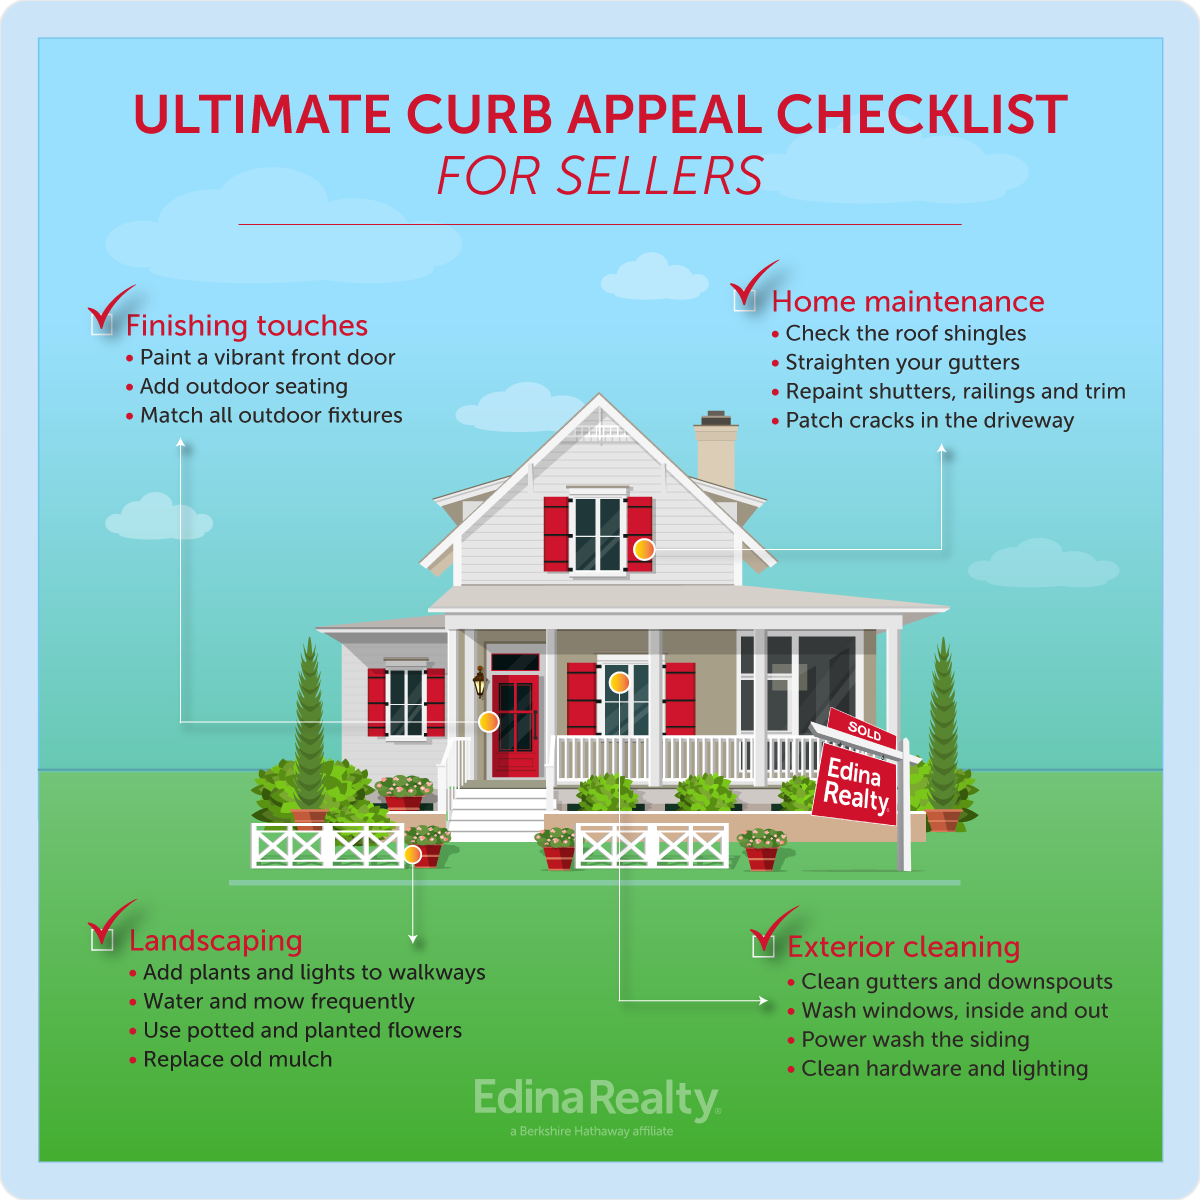 Curb appeal checklist for sellers | Edina Realty